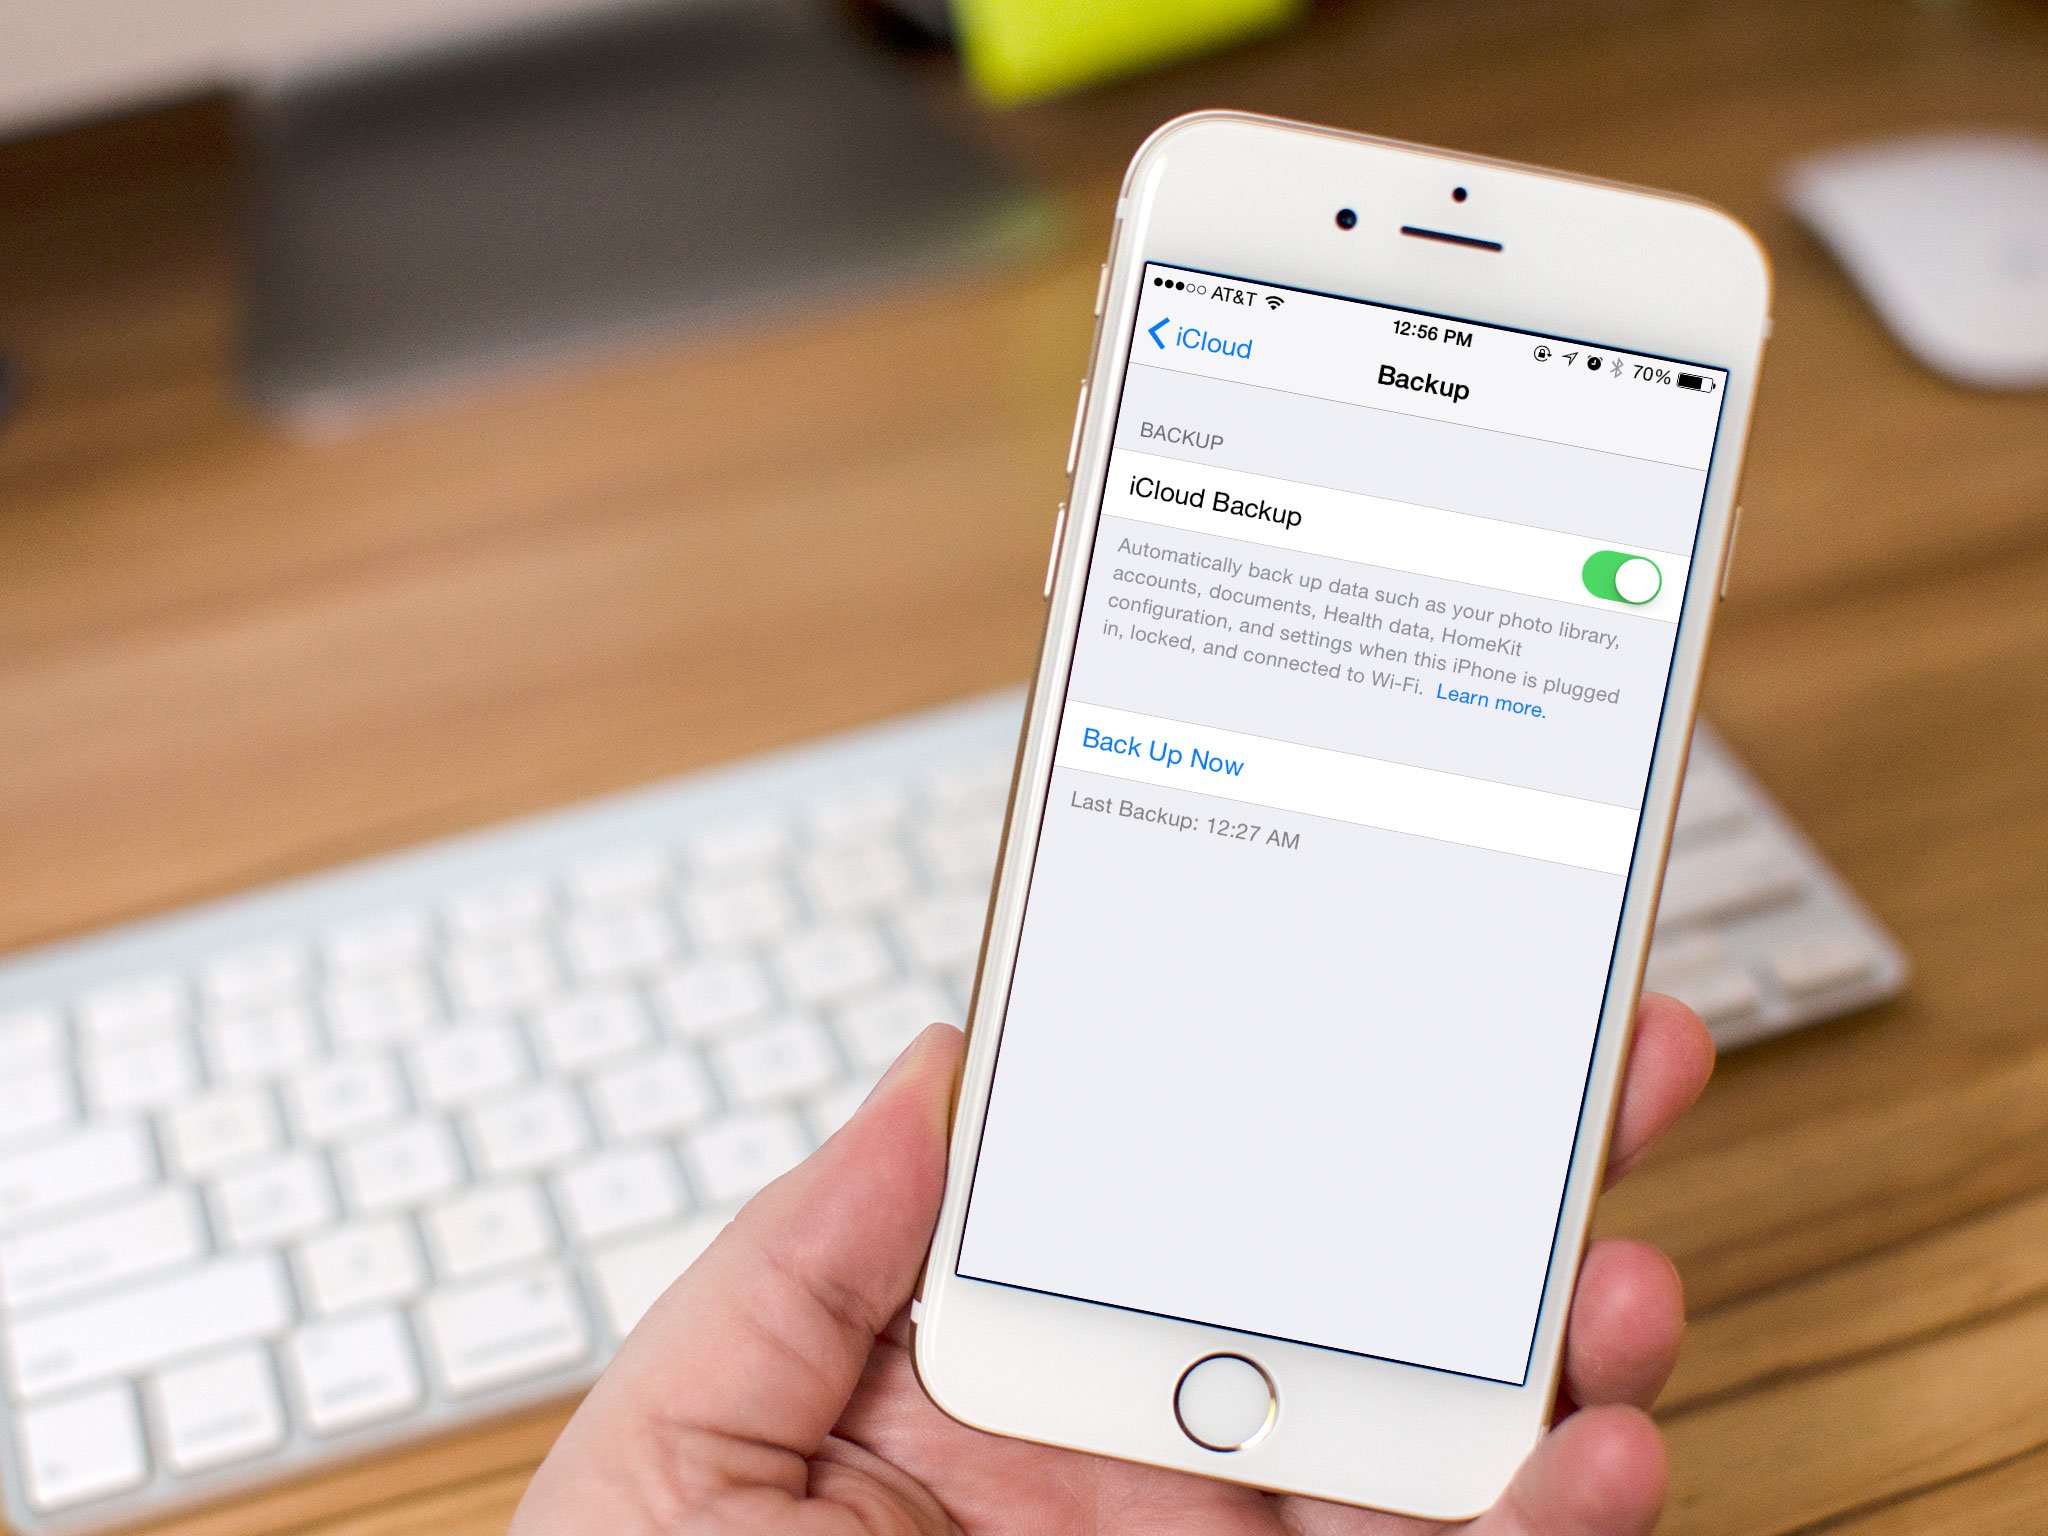 How to manually trigger an iCloud backup